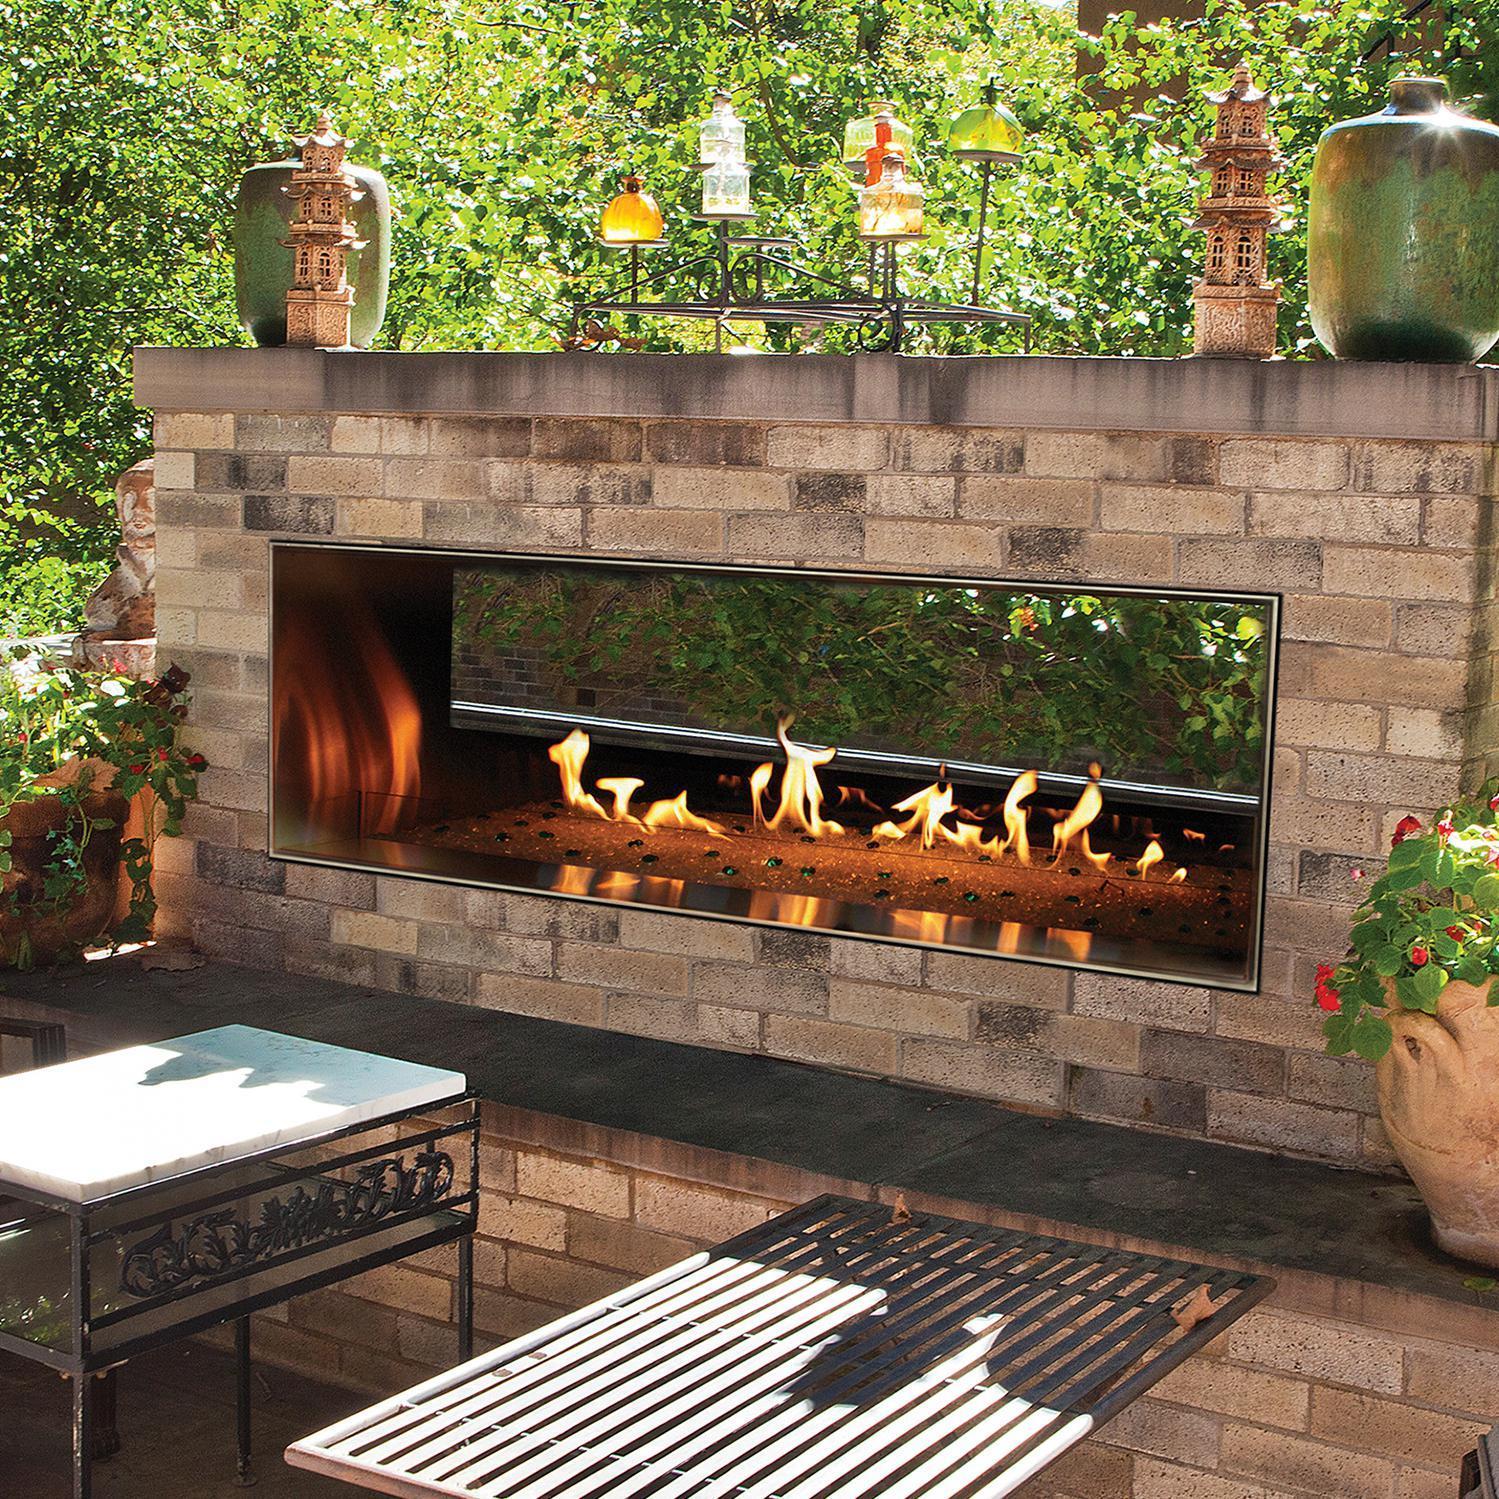 Outdoor Linear Gas Fireplace Fresh White Mountain Hearth by Empire Carol Rose 48 Inch Vent Free